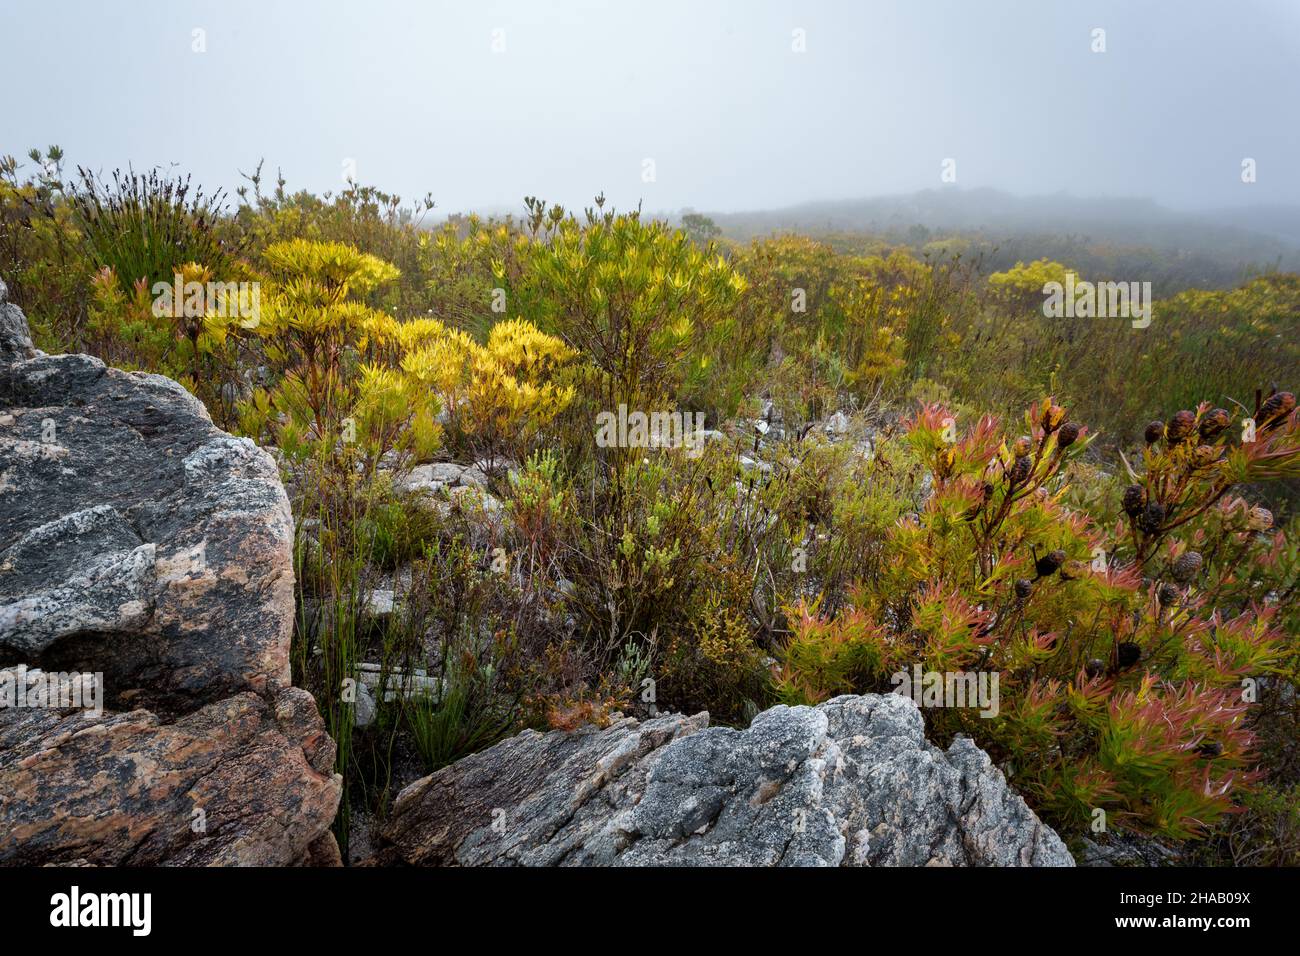 Fynbos vegetation amongst mountain rocks in the mist. Kogelberg Nature Reserve, Whale Coast, Overberg, Western Cape, South Africa. Stock Photo